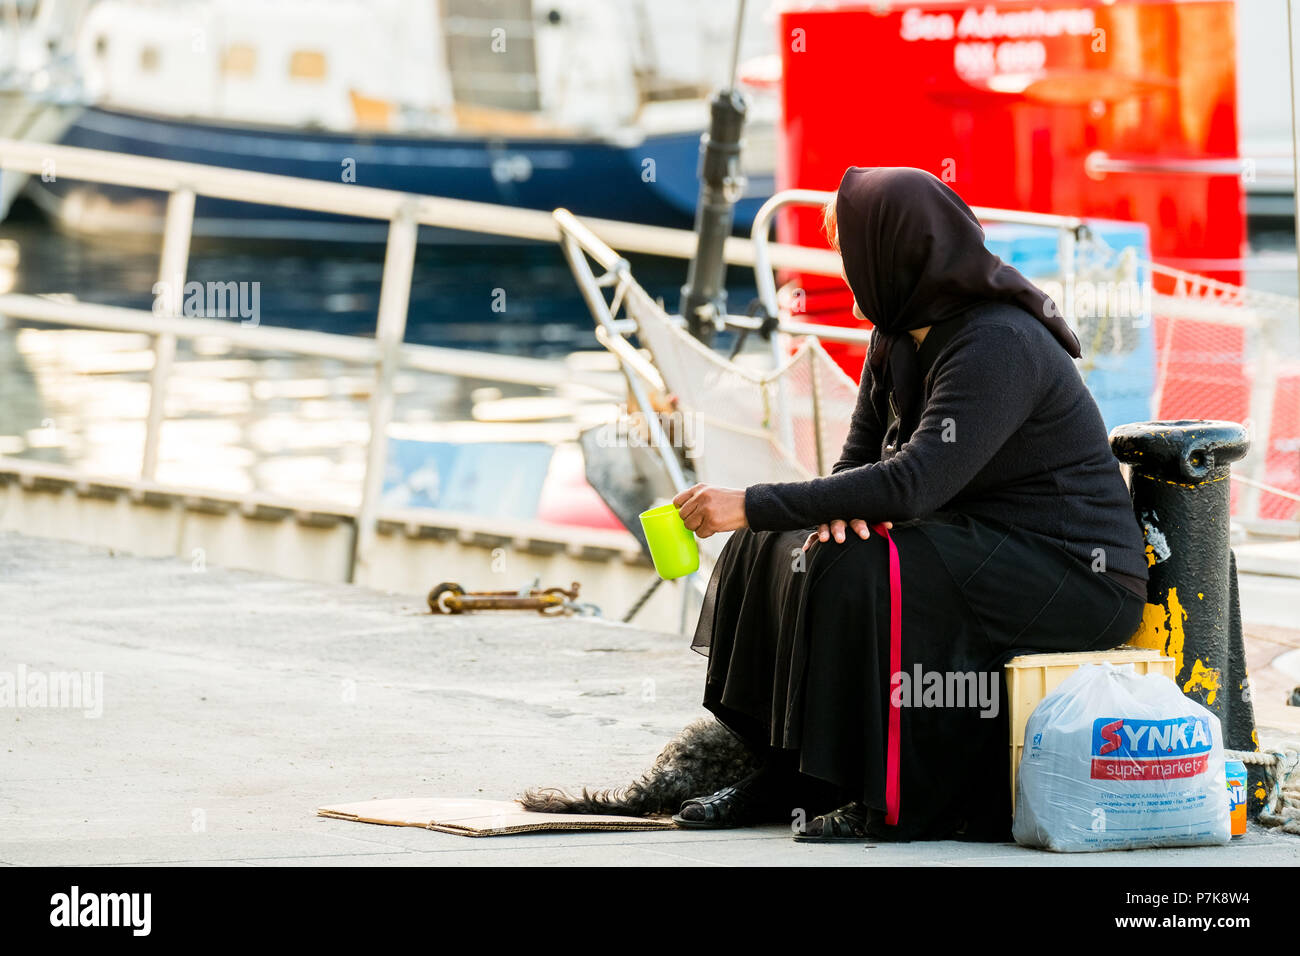 Woman begging in black robe in the port of Chania, poverty, Europe, Crete, Greece Stock Photo